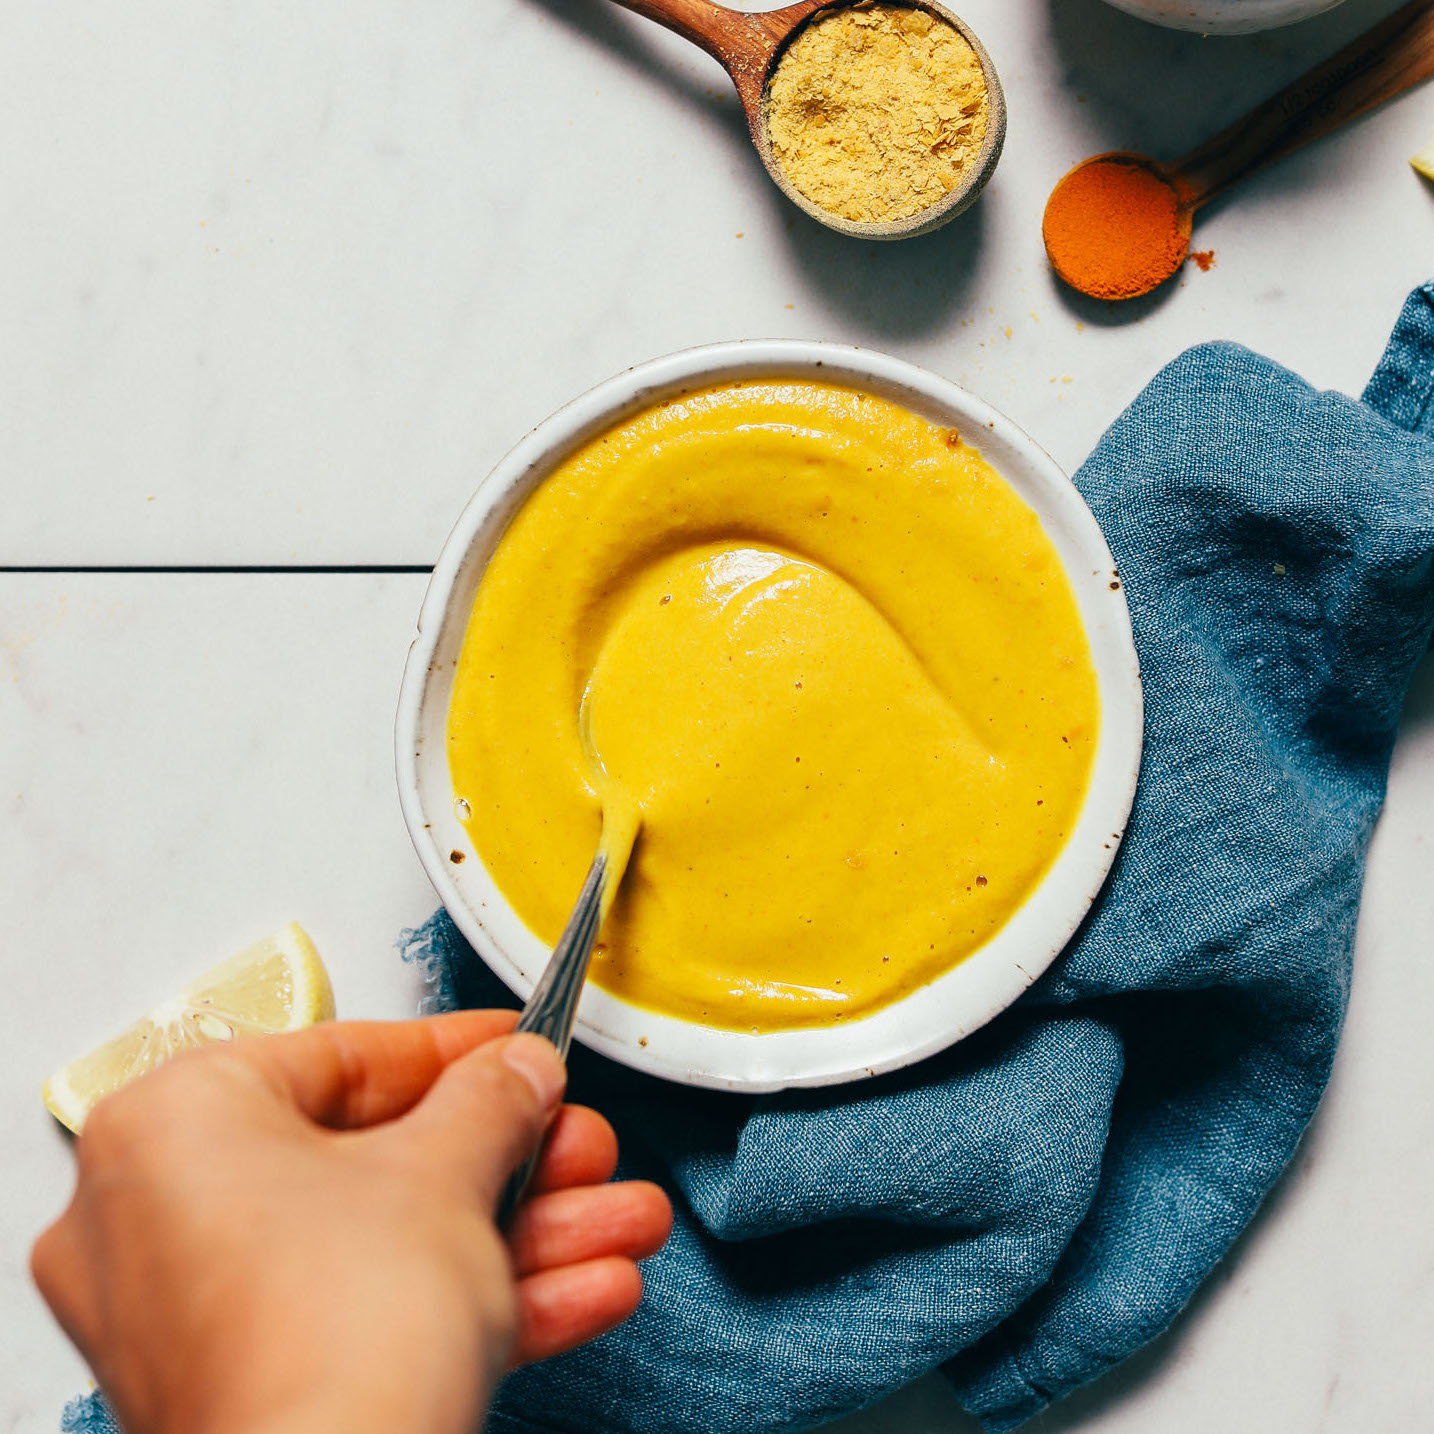 Stirring a bowl of bright yellow sauce made from chickpeas, turmeric, nutritional yeast, and more